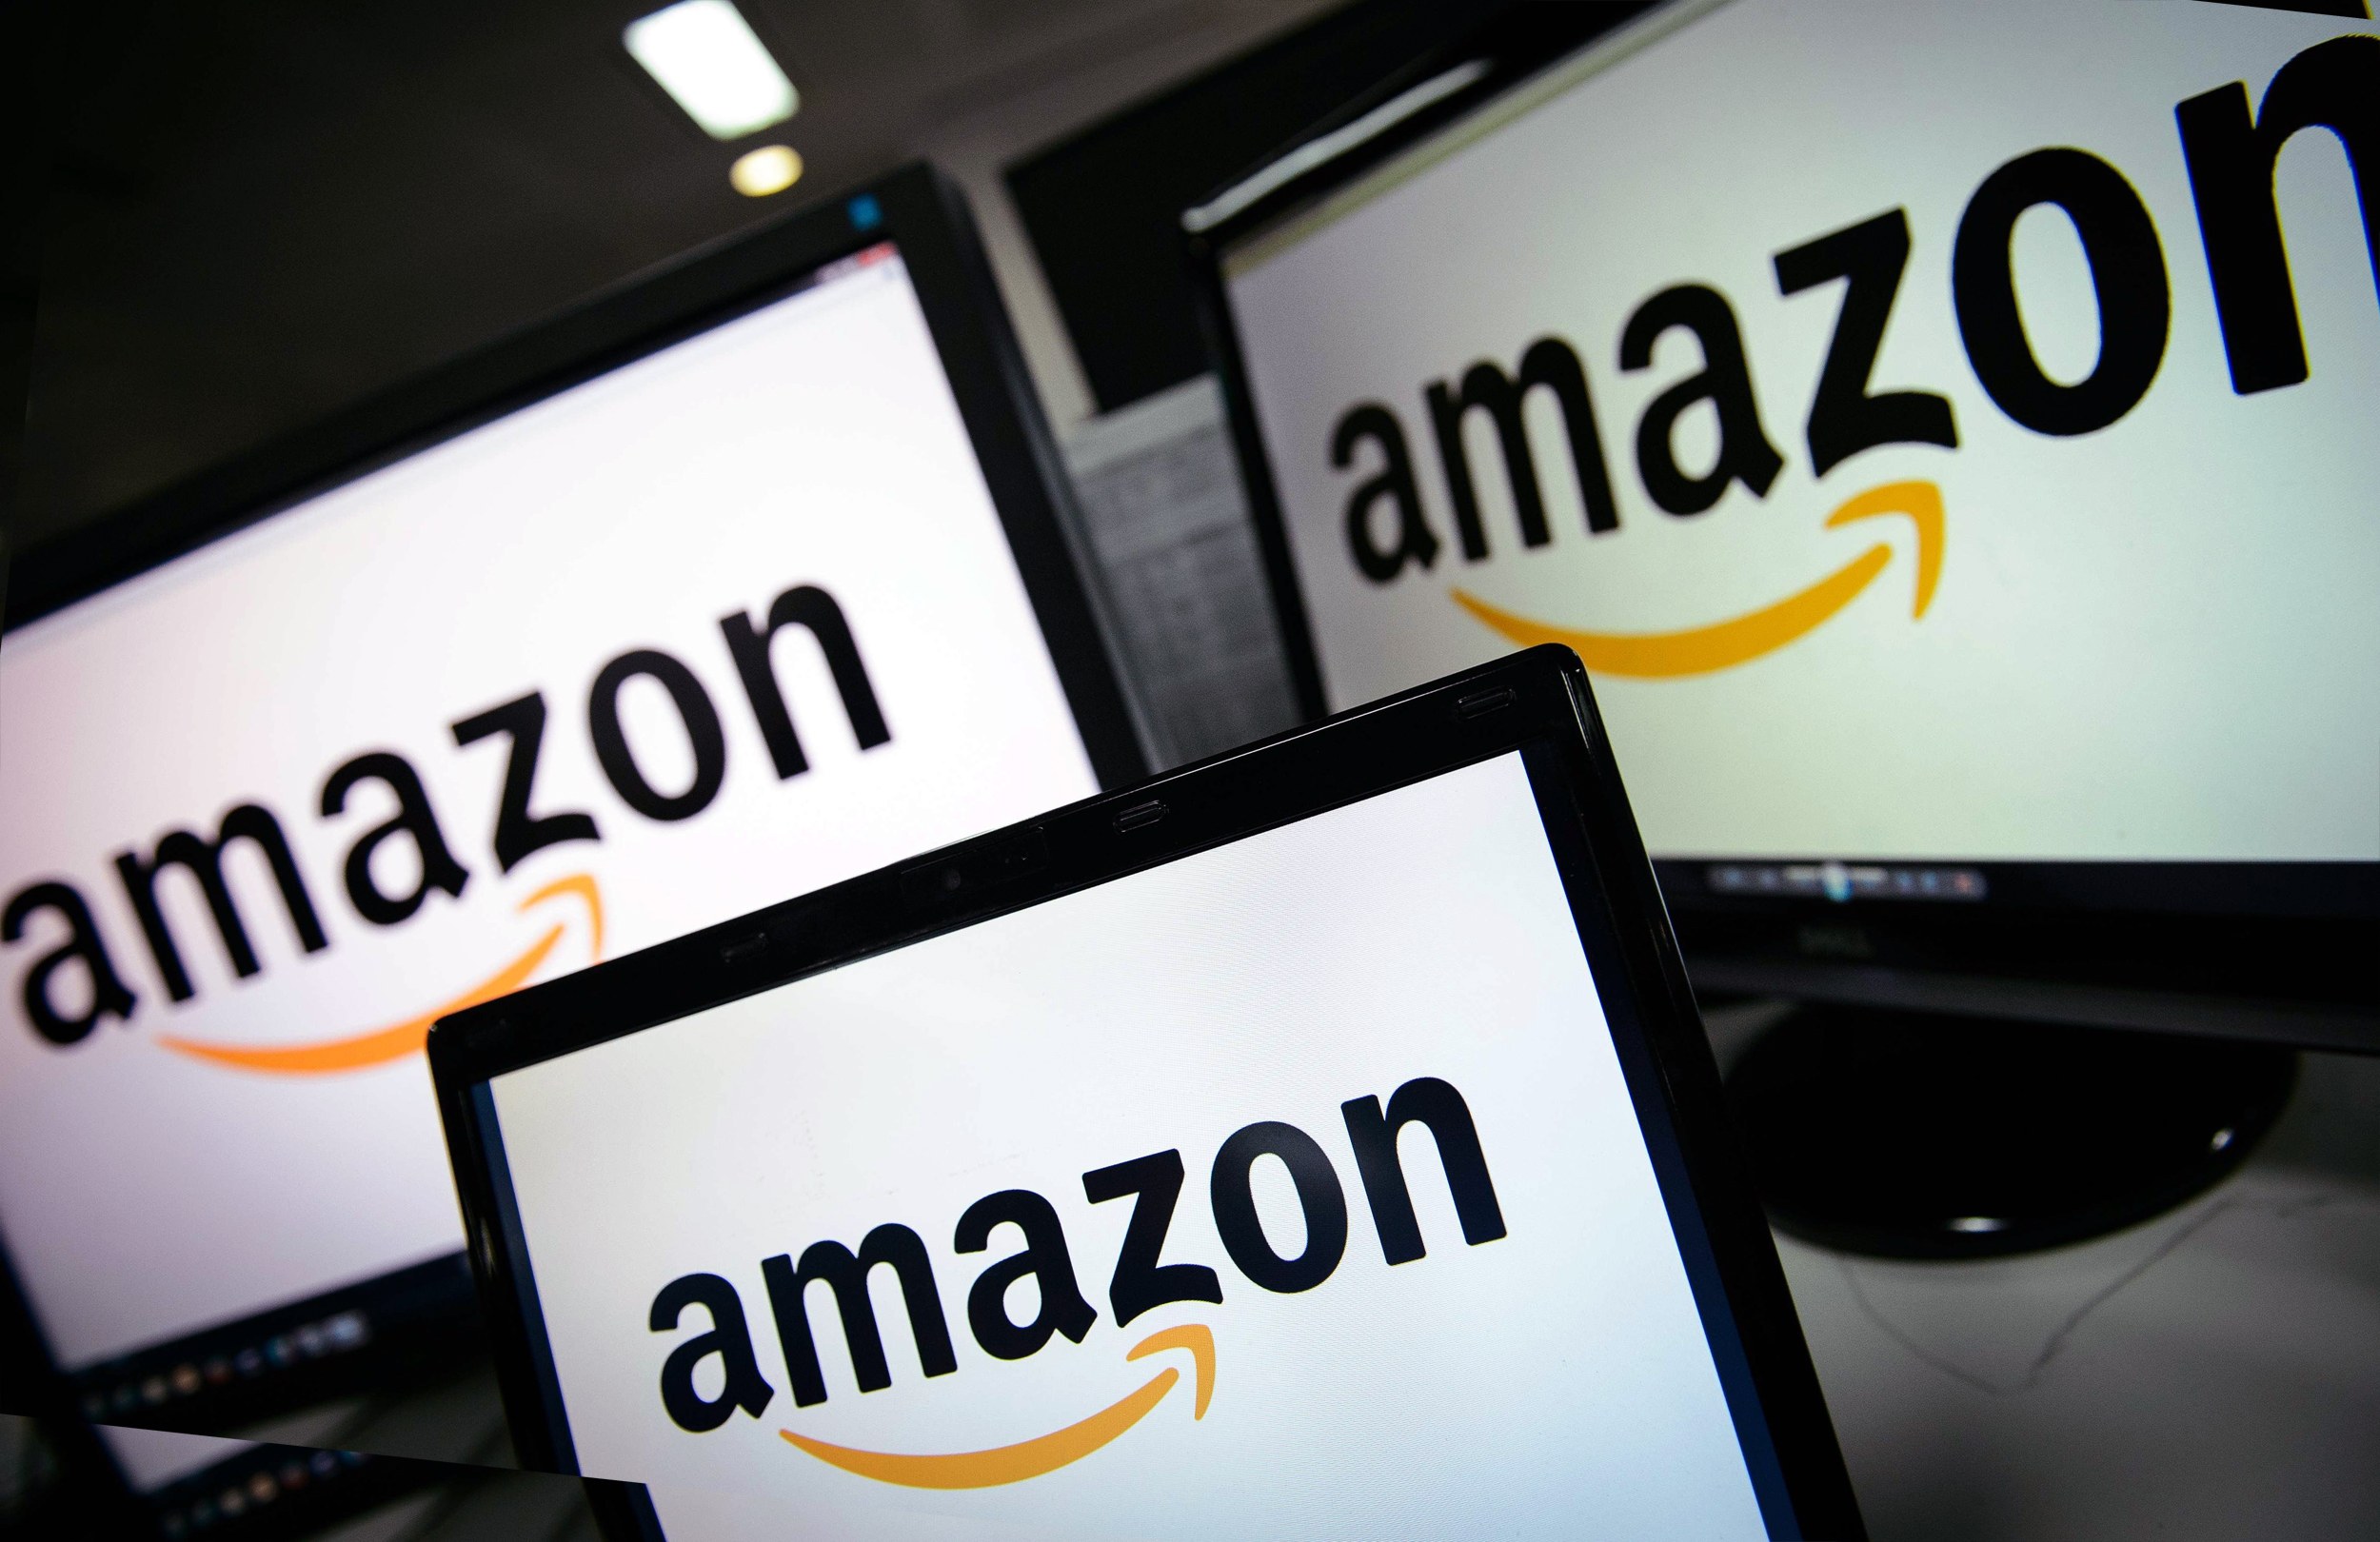 Amazon has purged over 5,700 top reviewers over last 2 years